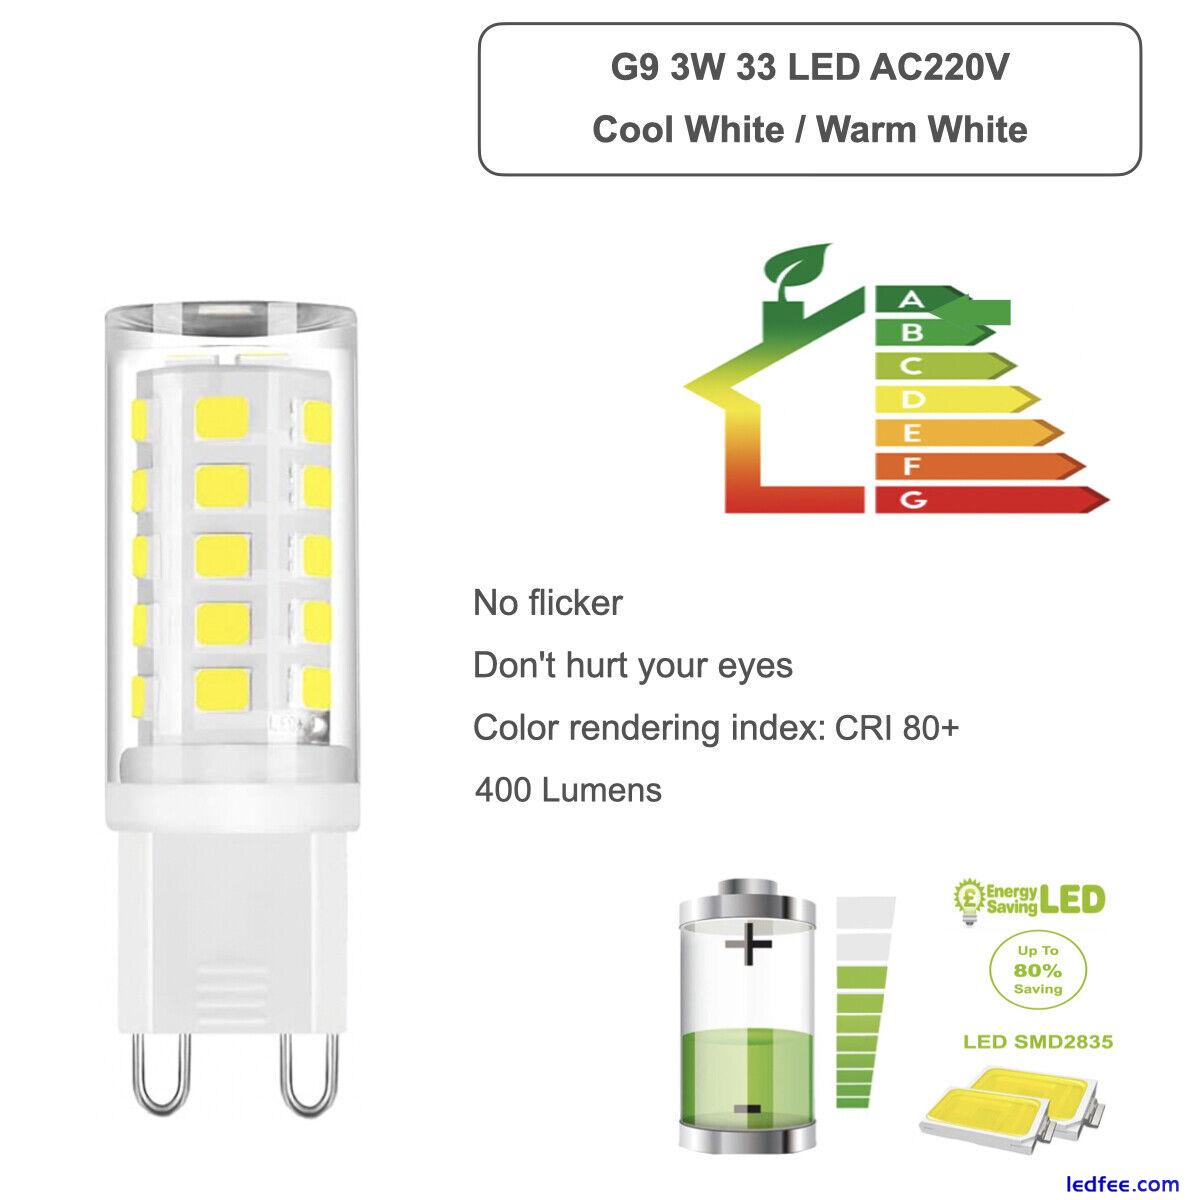 LED Light Bulbs G9 3W | 5W SMD2835 Replacement For G9 Halogen Capsule Bulbs 4 